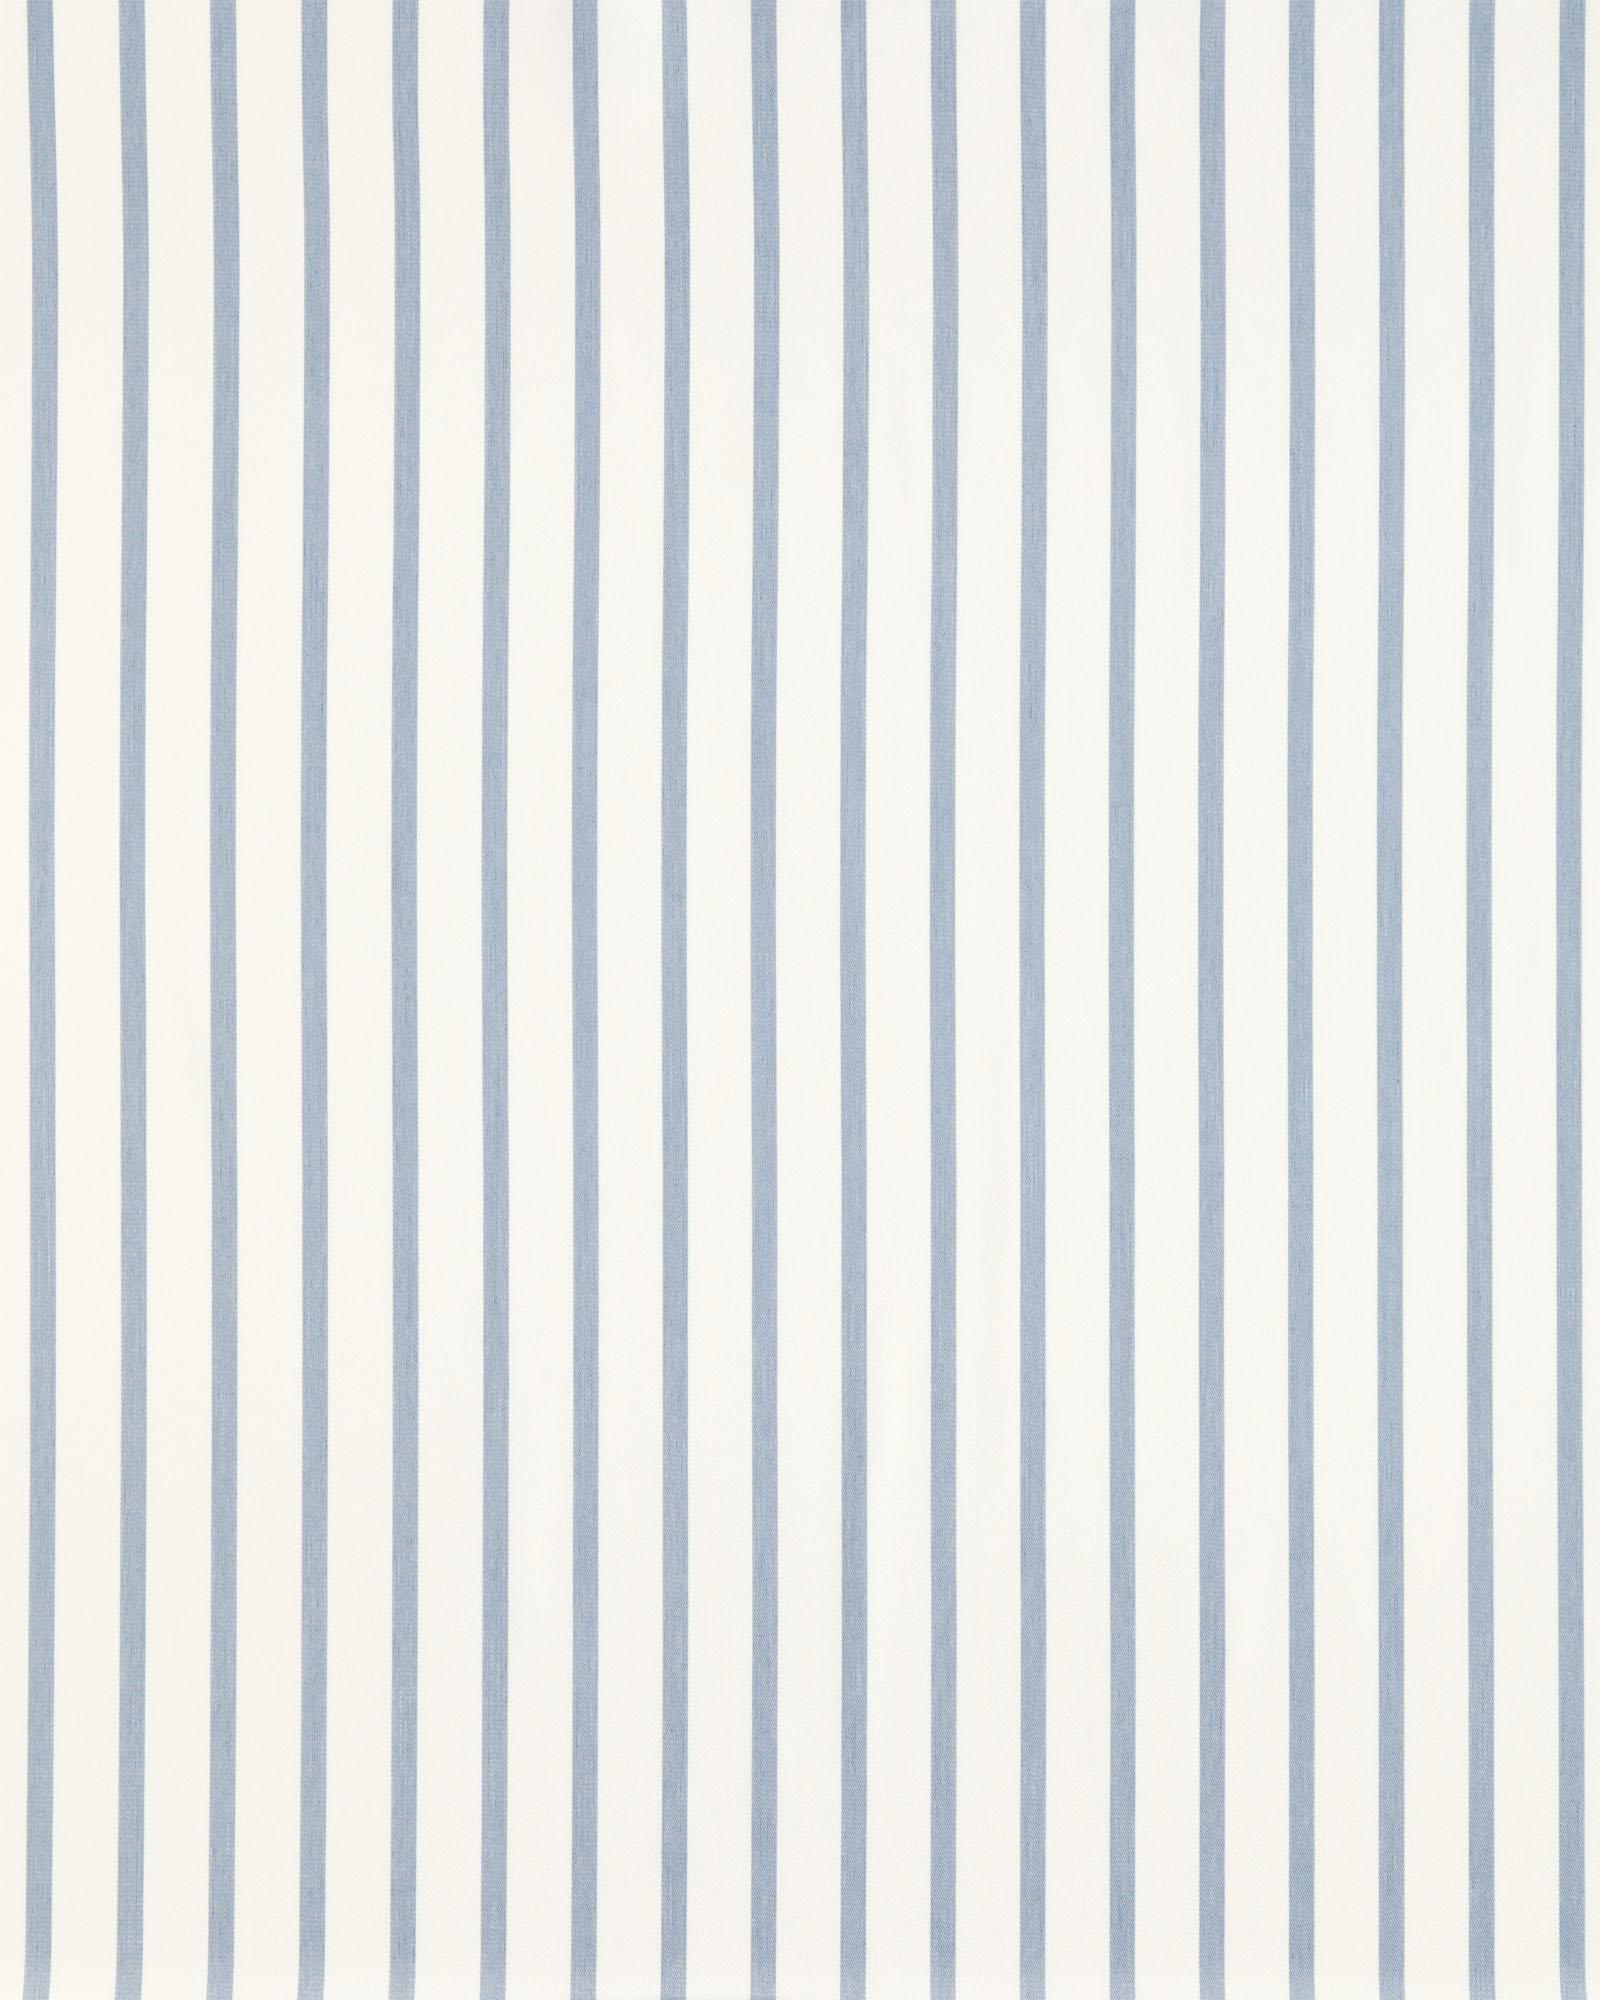 Striped Canvas Fabric in Navy Blue and White, Slipcovers / Upholstery, 100 % Cotton, 54 Wide, By the Yard